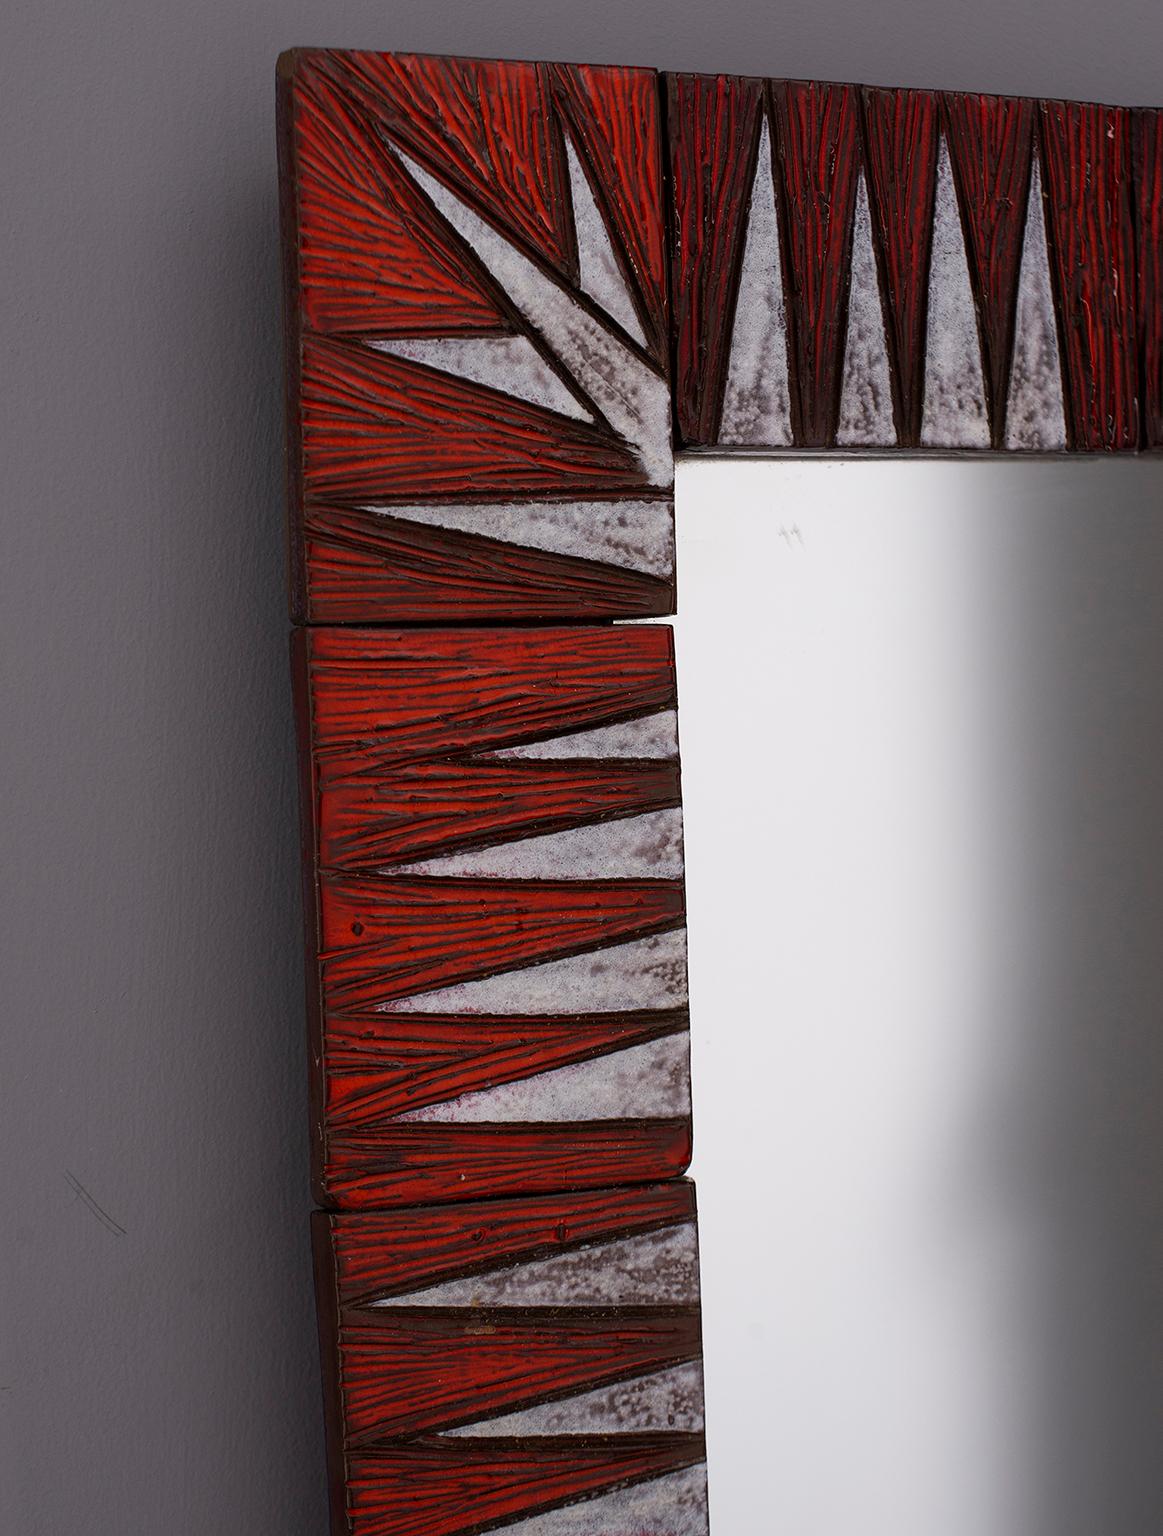 French rectangular mirror has ceramic frame with red and white etched and glazed finish, circa 1970s. Handmade ceramic tiles form a striking pattern of blade that border the mirror. Unknown maker.